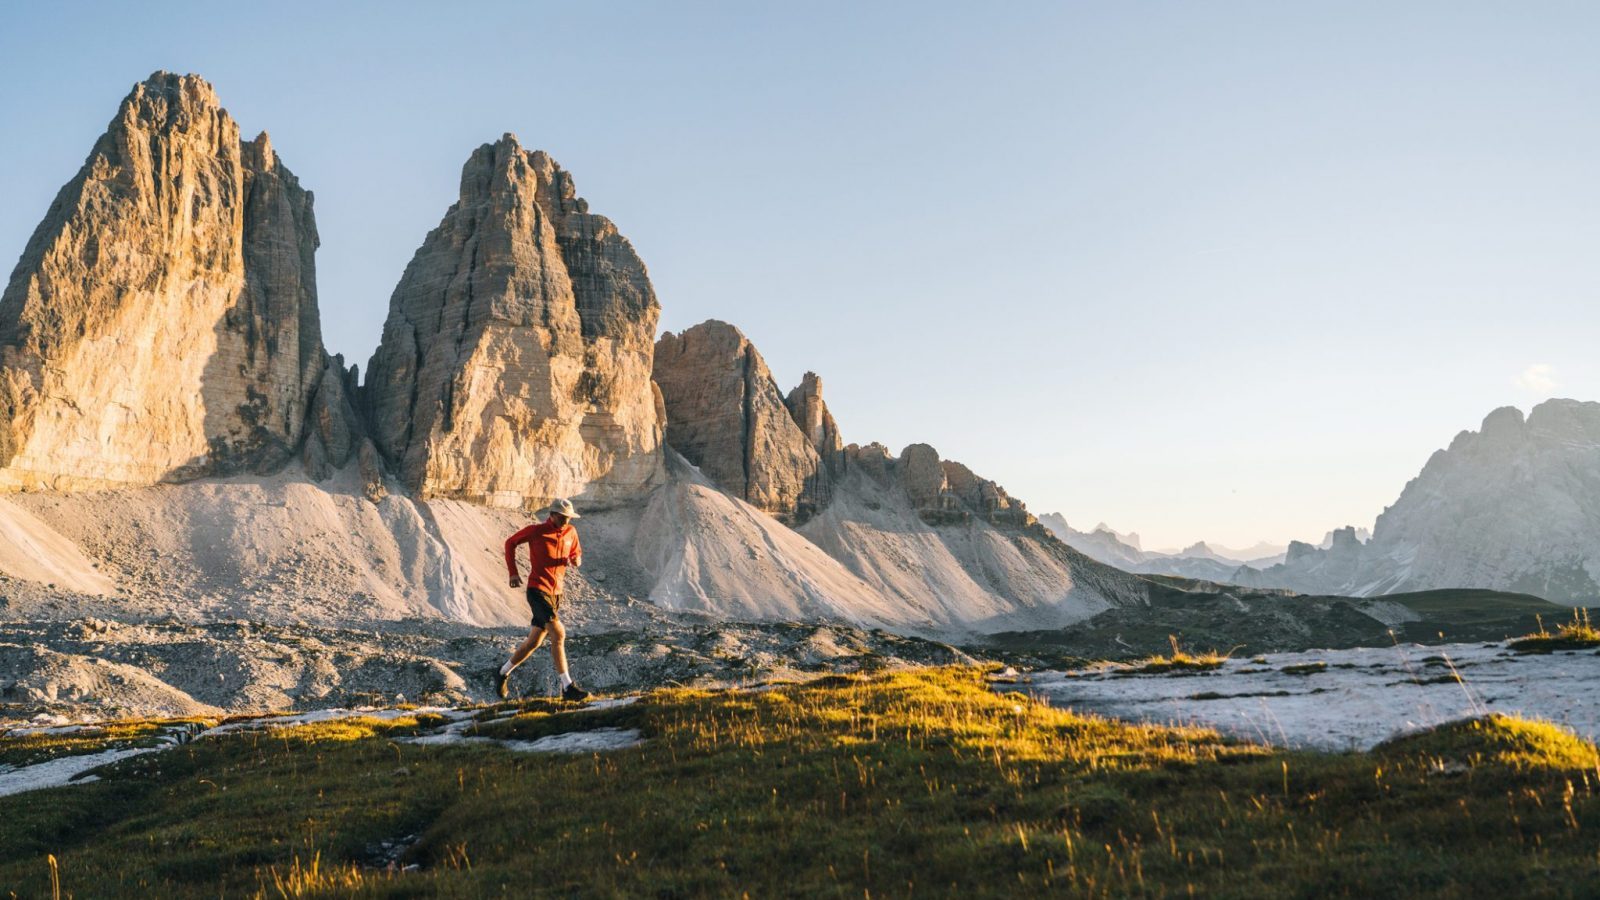 Run the Dolomites: A Classic Hut-to-Hut Trail Running Expedition